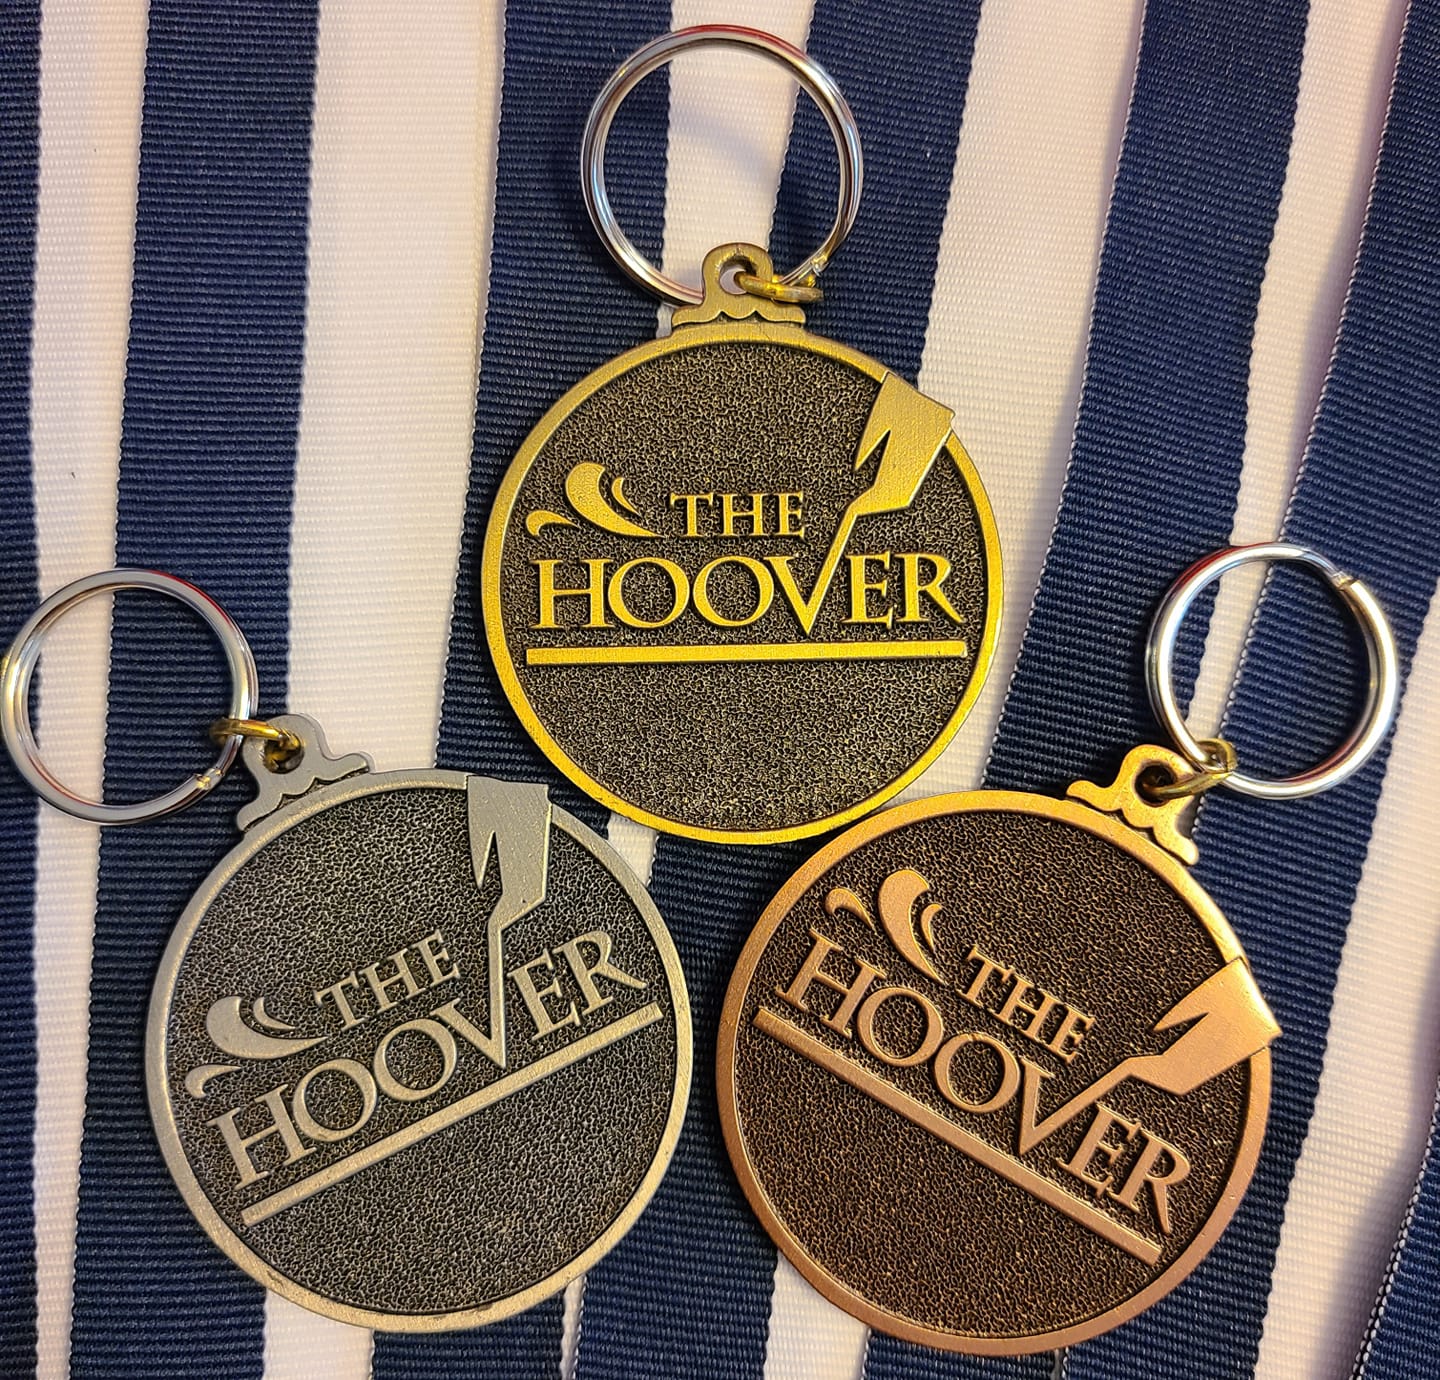 Stop by the Registration/Check-in Table to purchase a Hoover Key Ring!